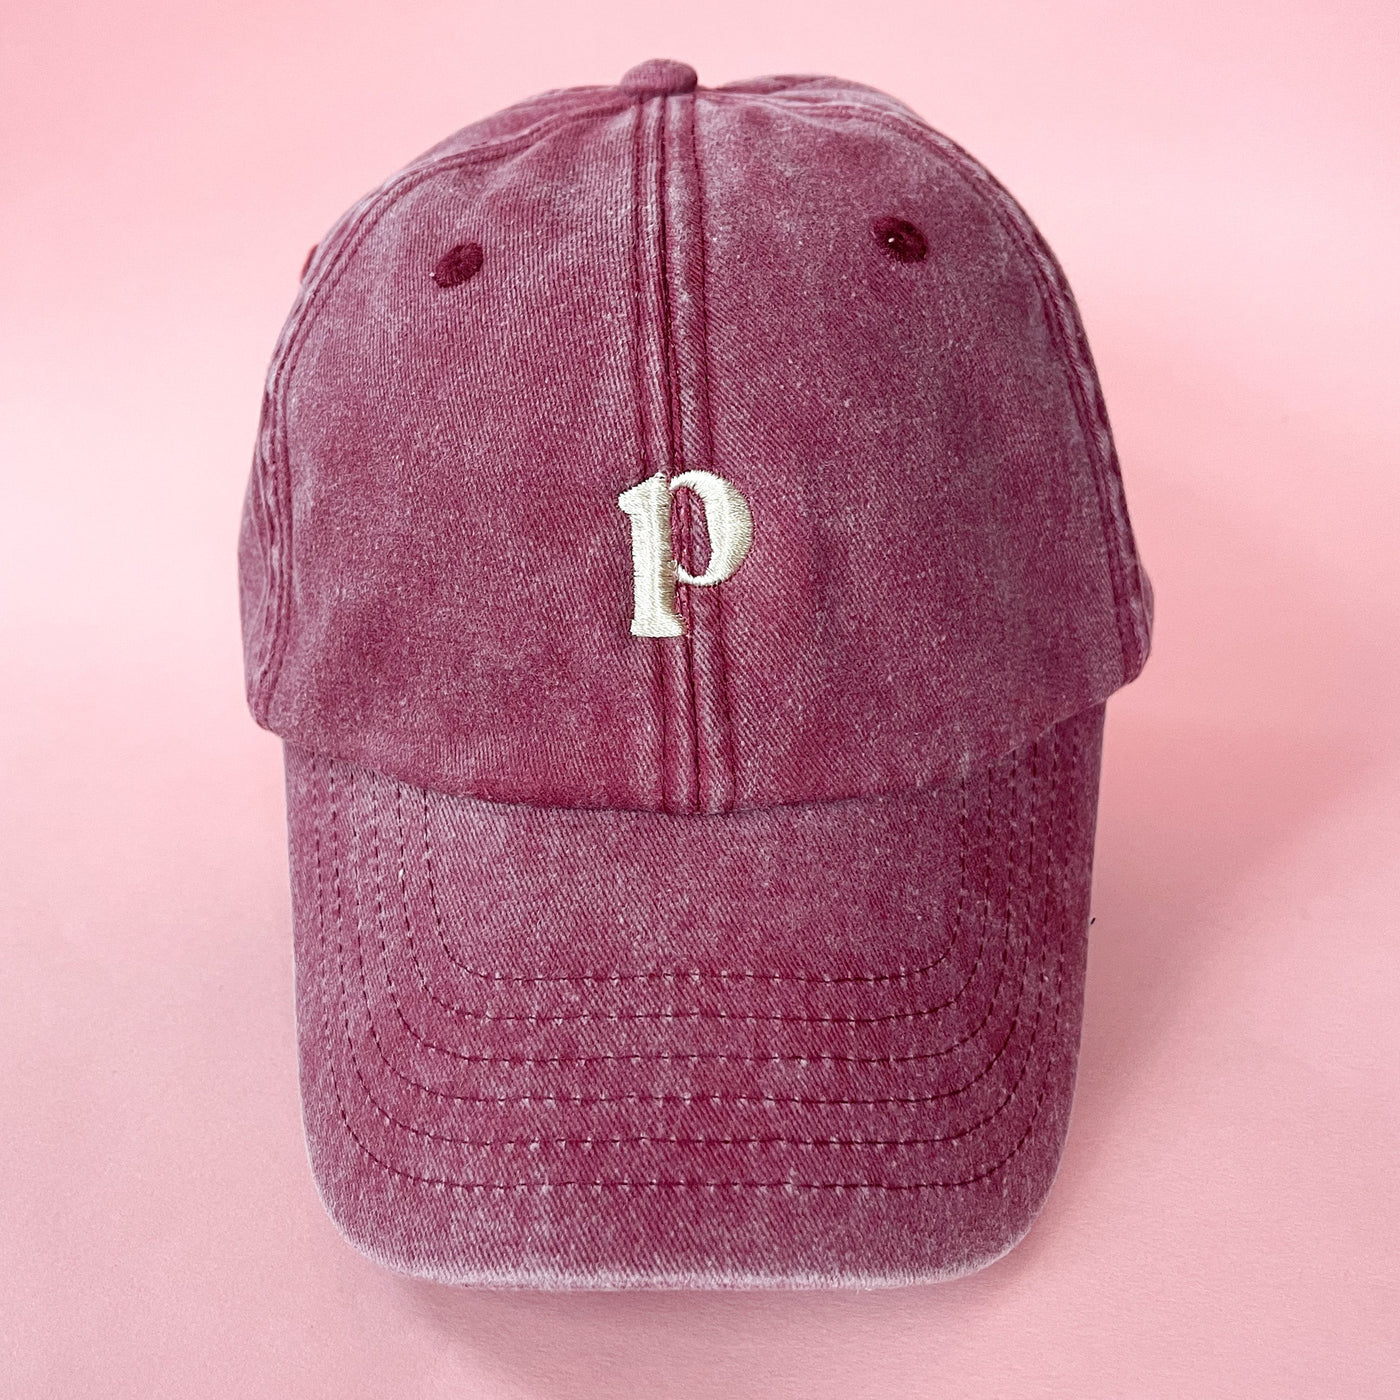 Family & Friends Cap in Vintage Red